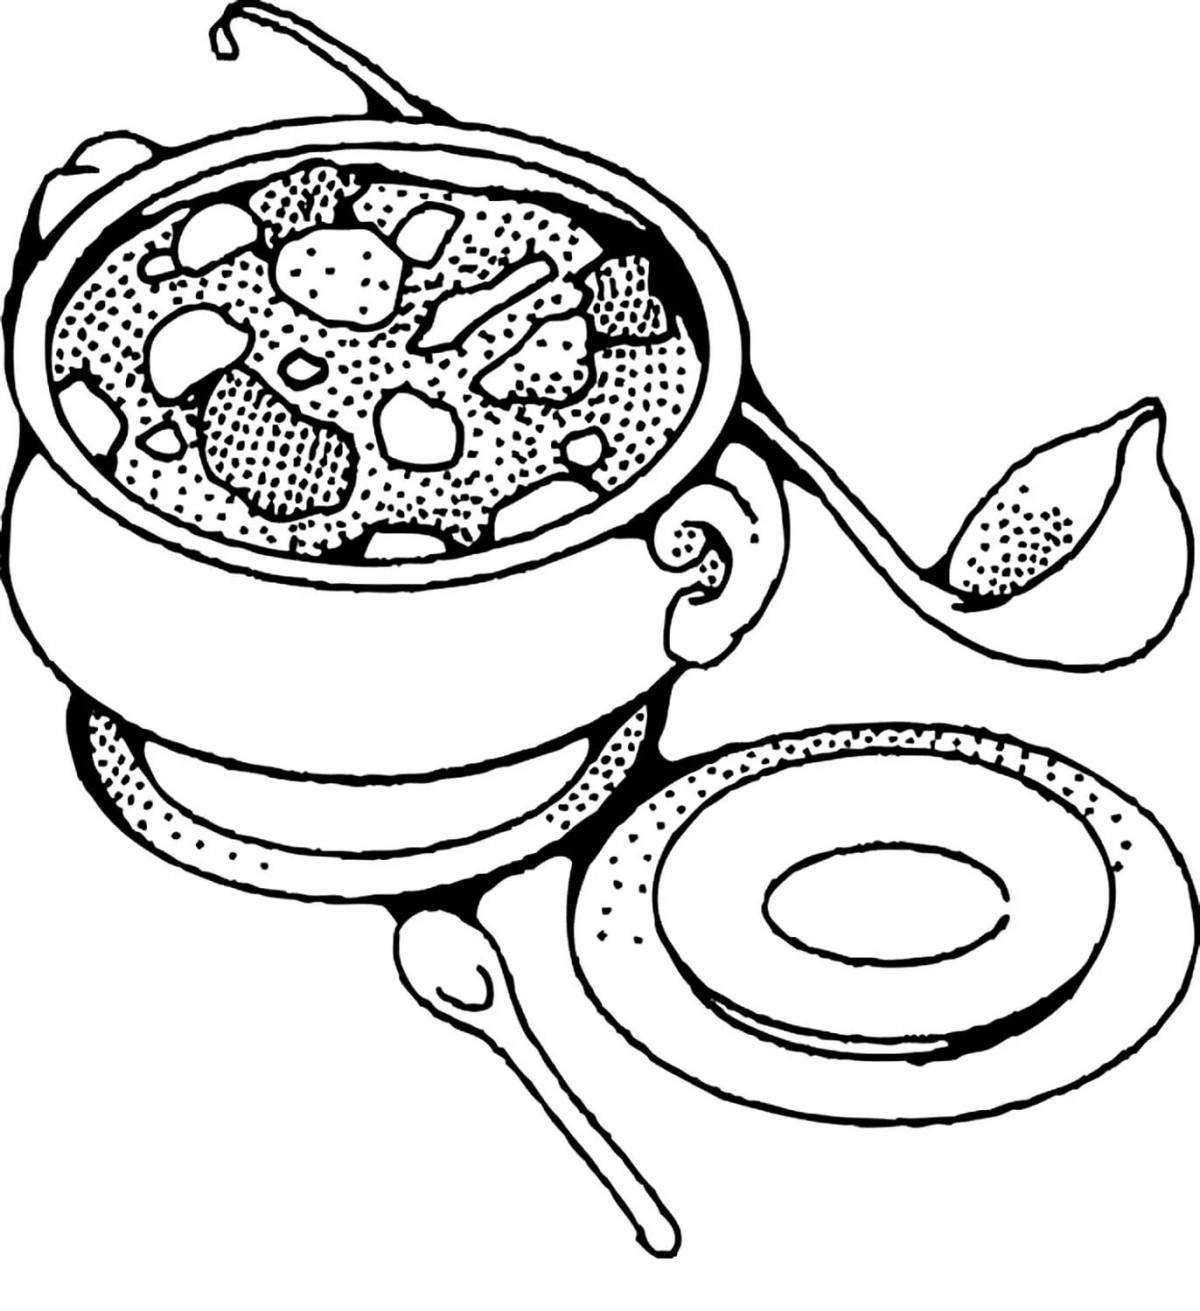 Gourmet dinner coloring page